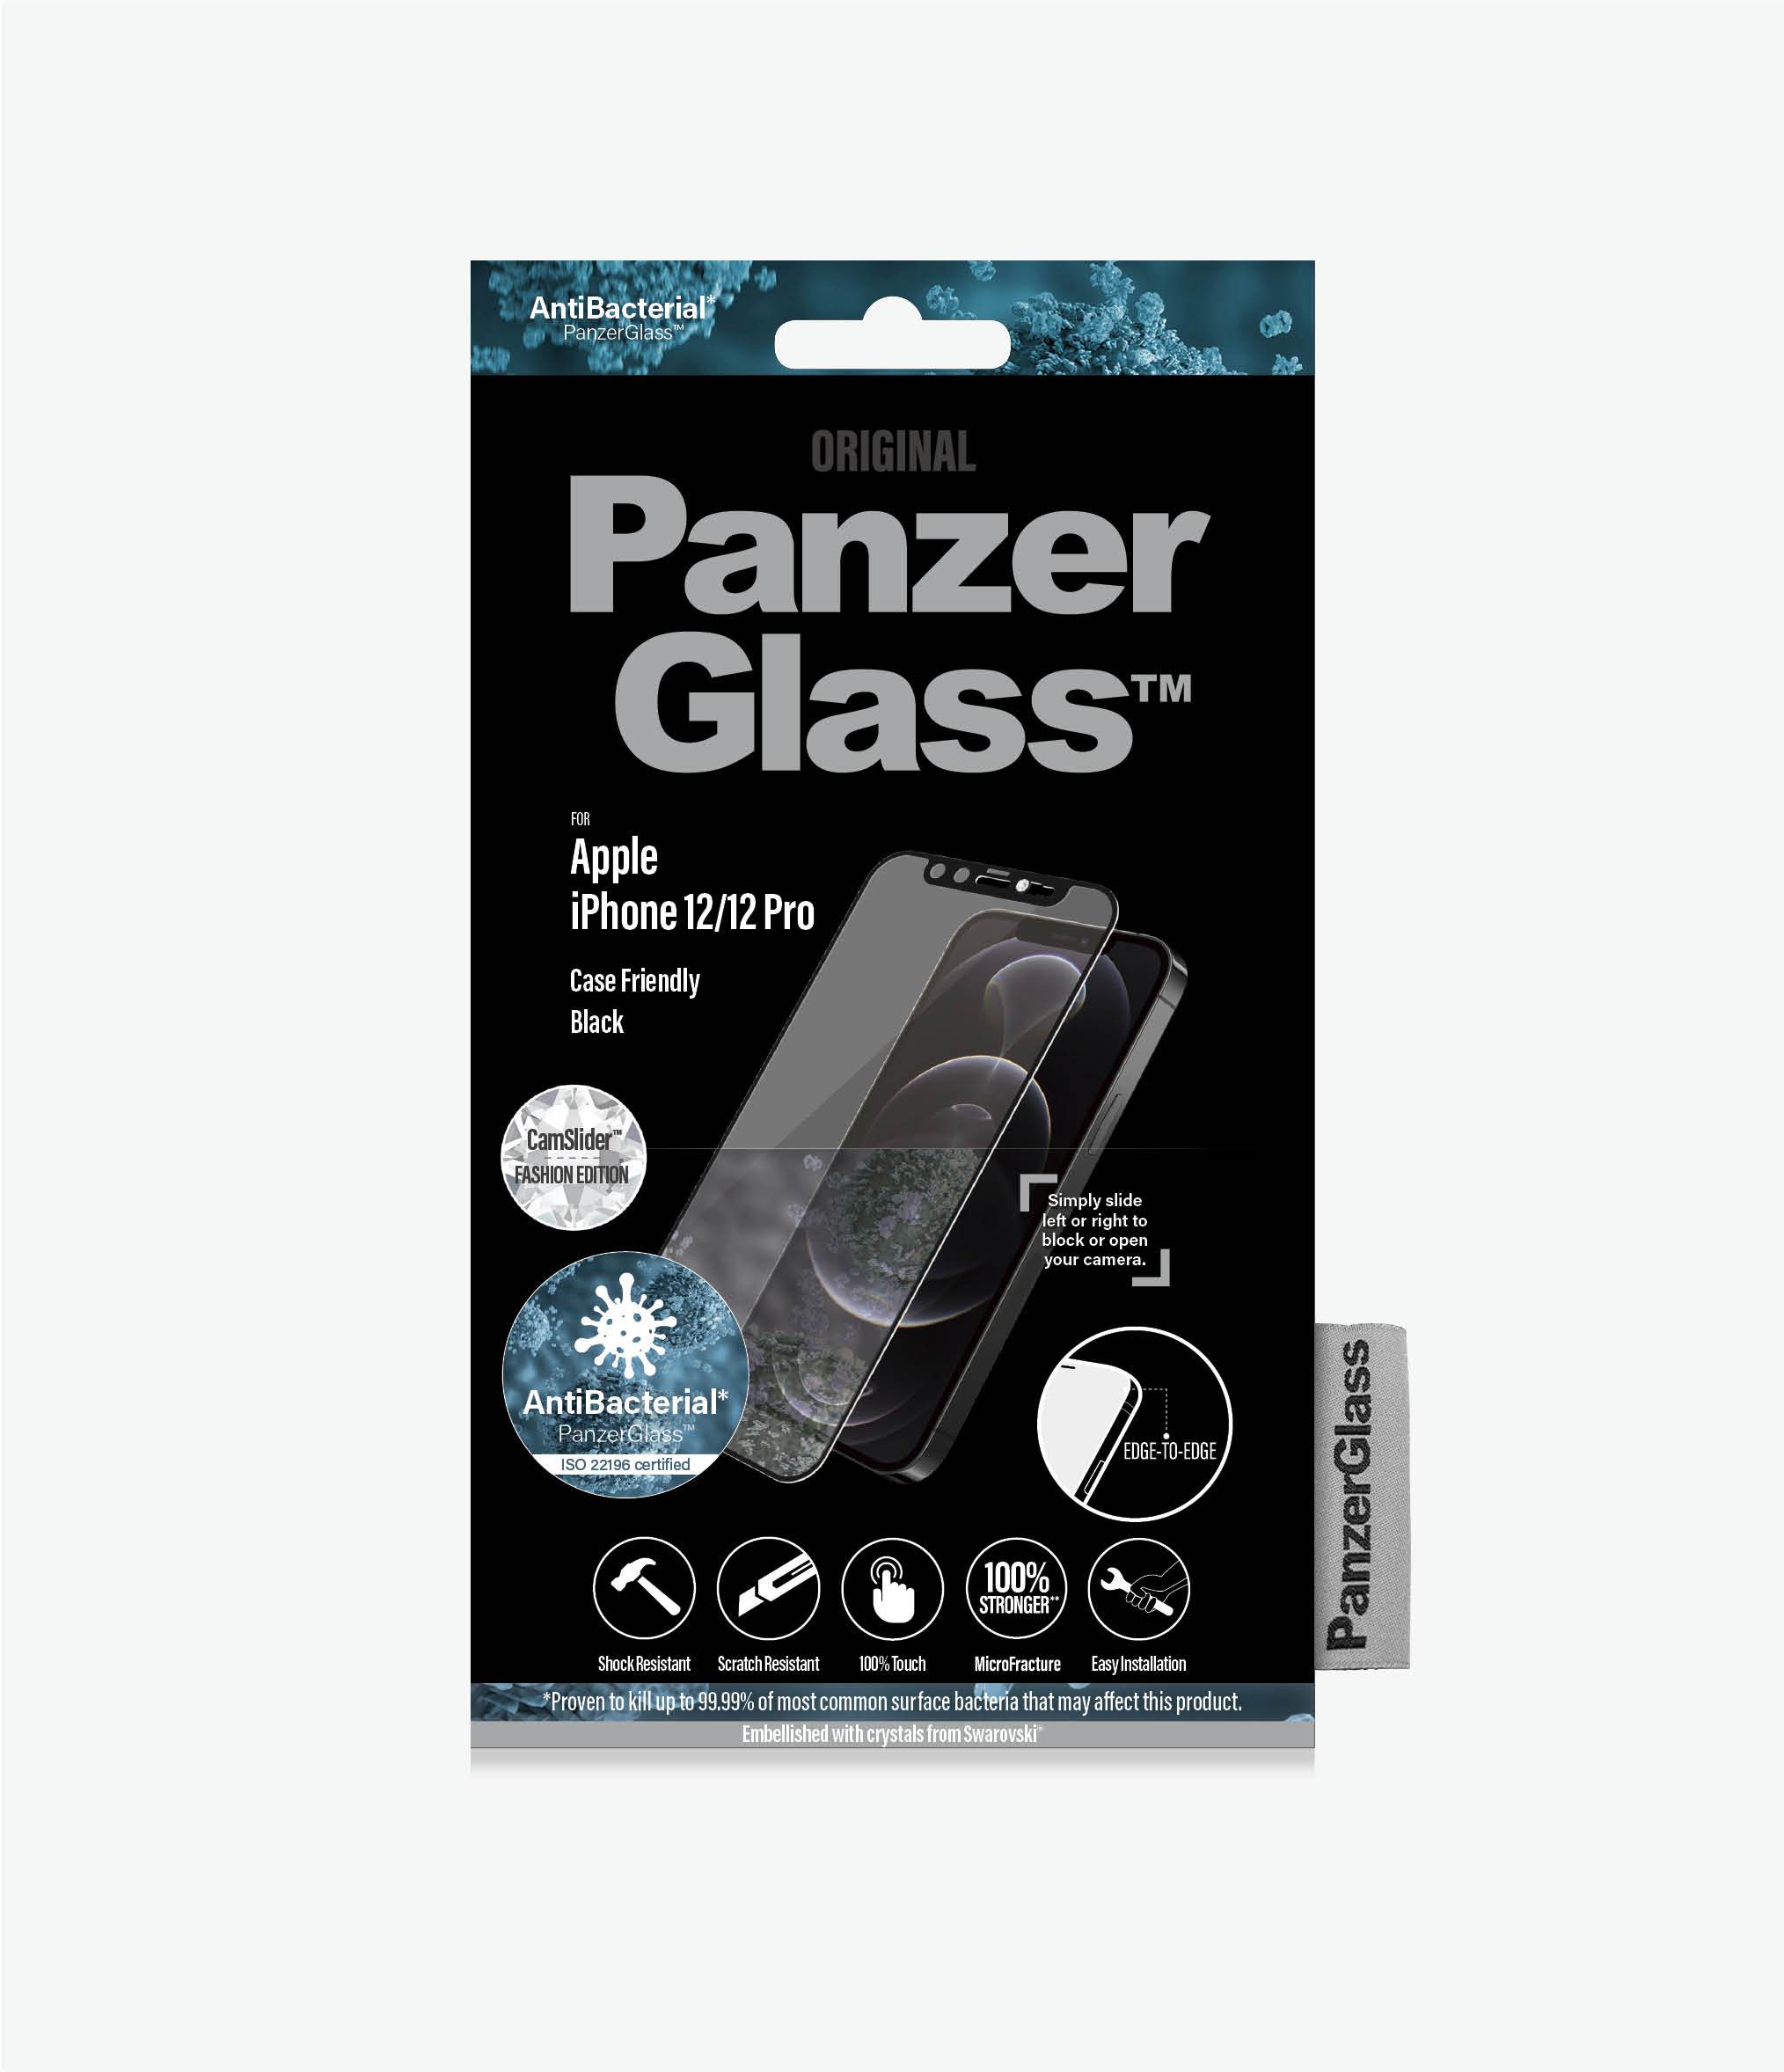 PanzerGlass™ Apple iPhone 12/12 Pro - CamSlider™ Embellished with crystals from Swarovski® - (2717) - Screen Protector - Scratch Resistant, 100% Touch